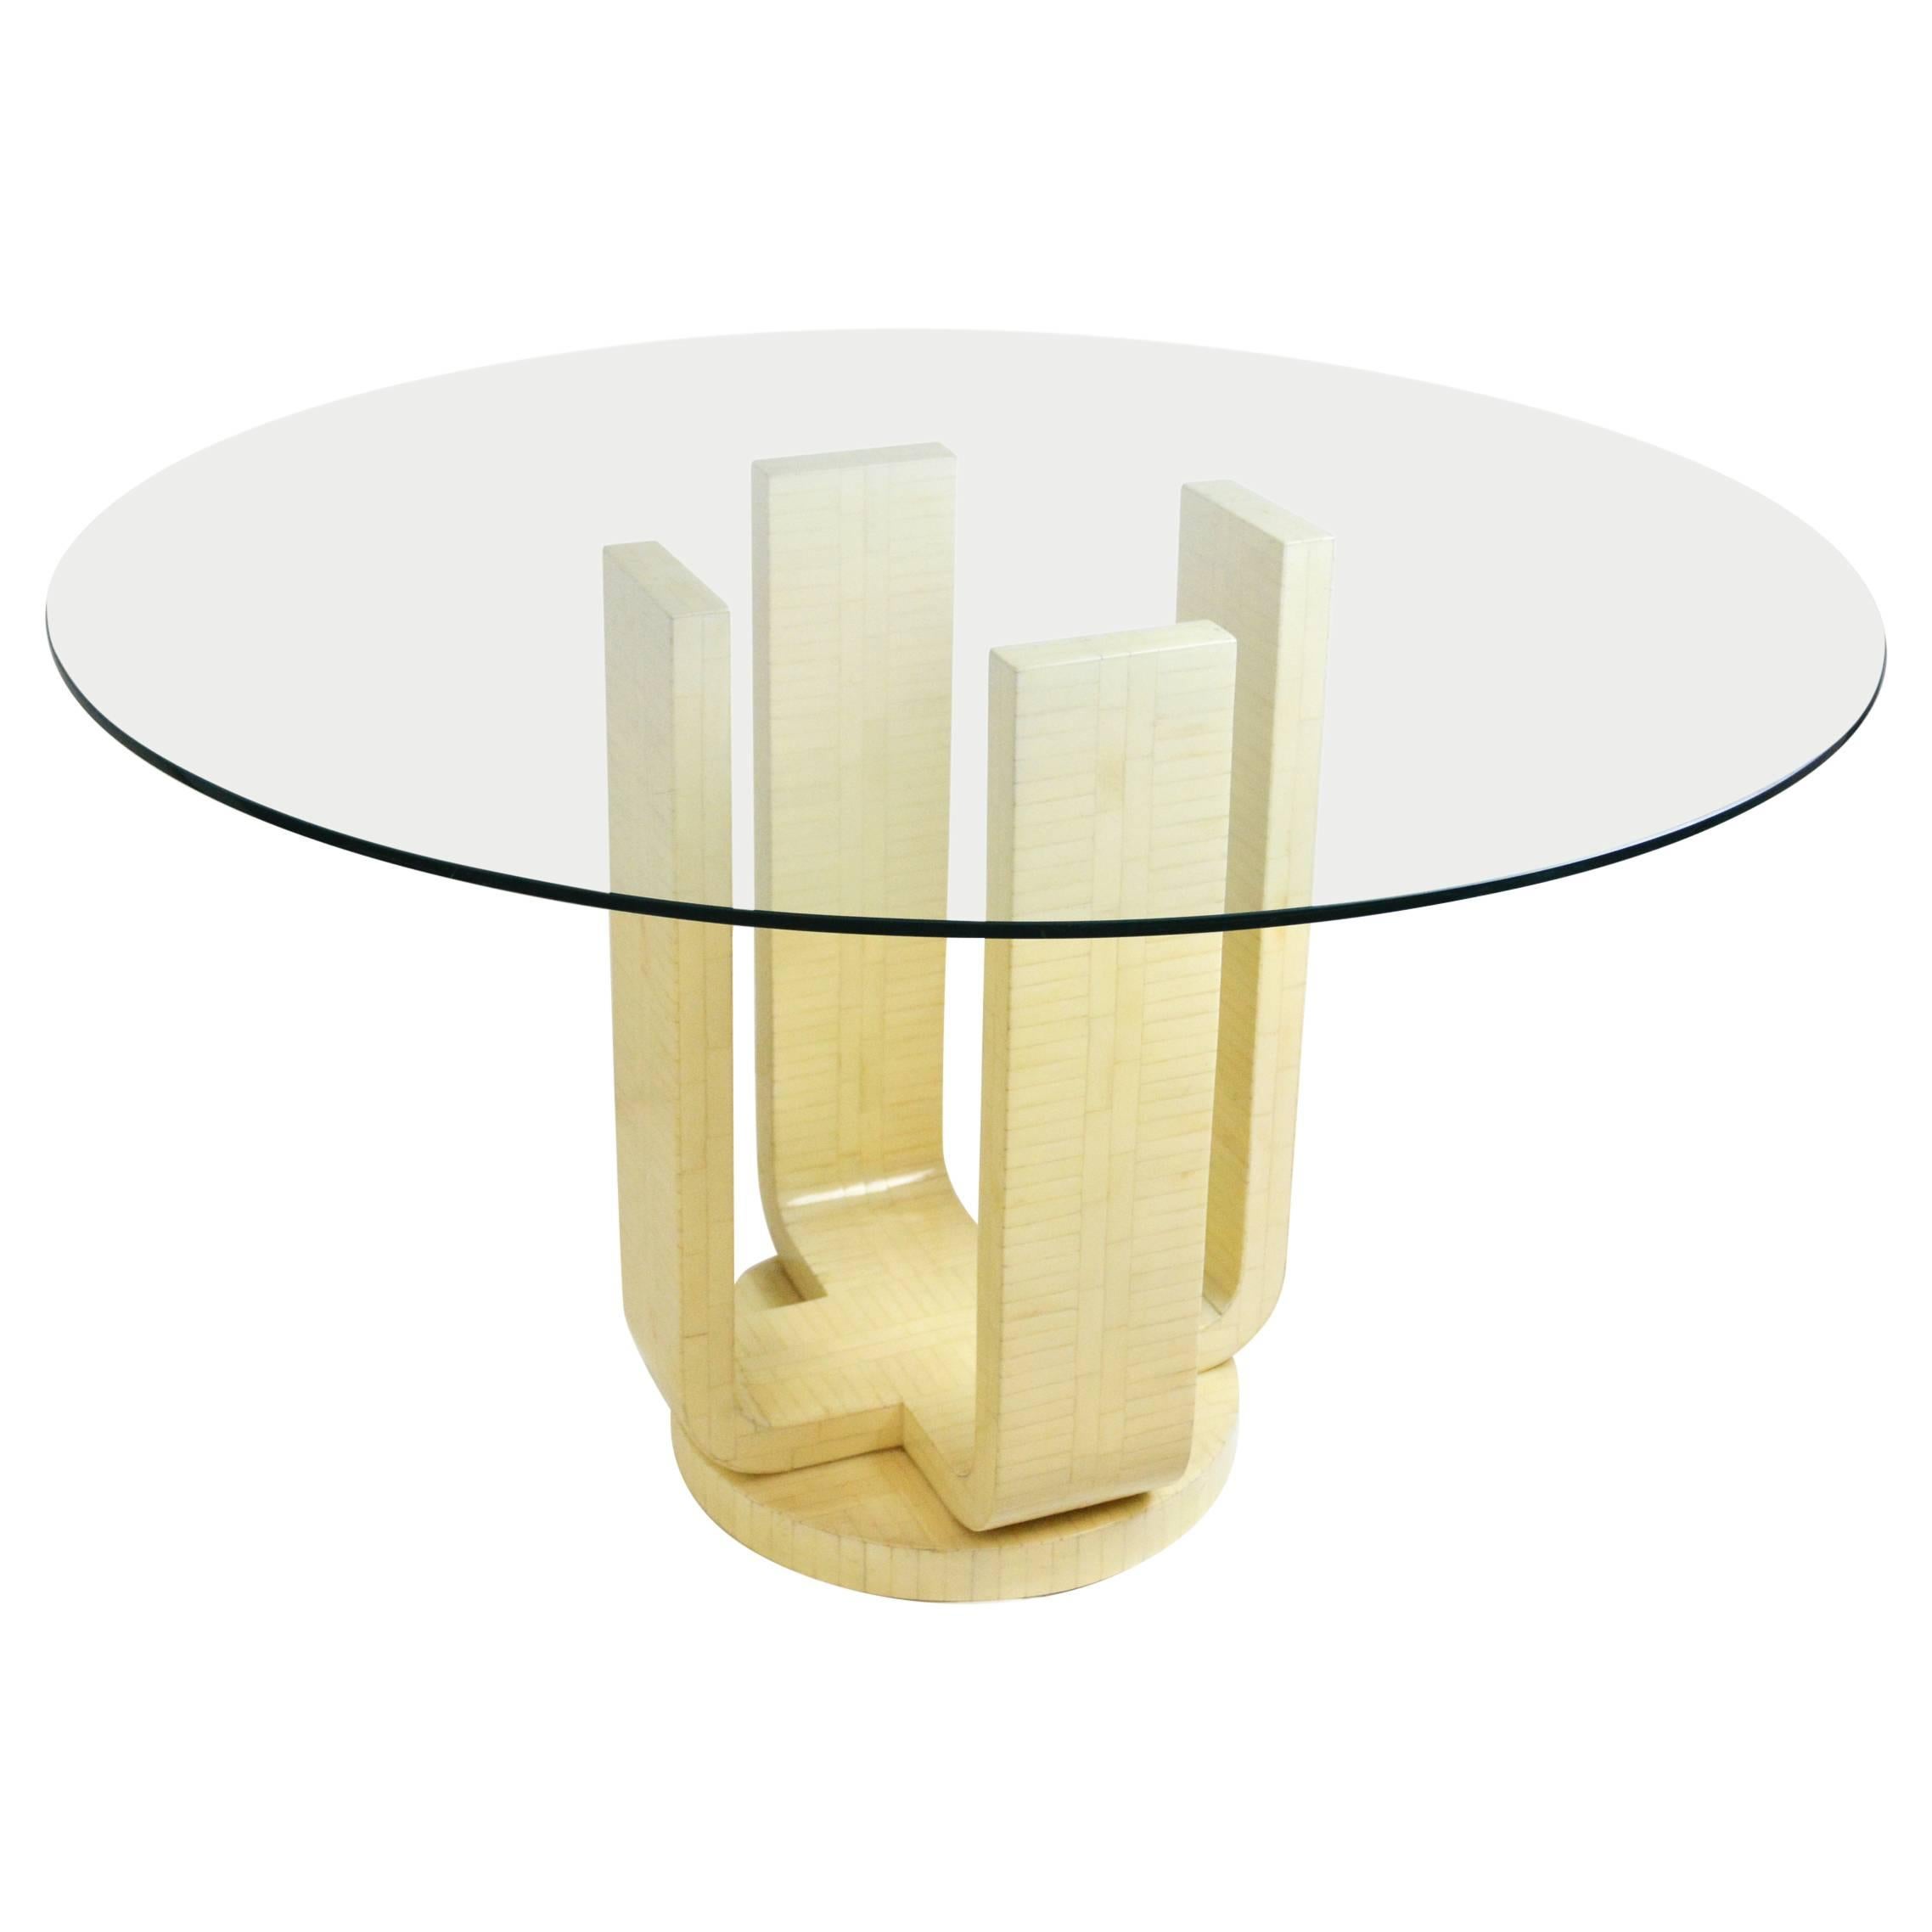 Karl Springer Style Tessellated Bone Dining Table with Glass Top For Sale